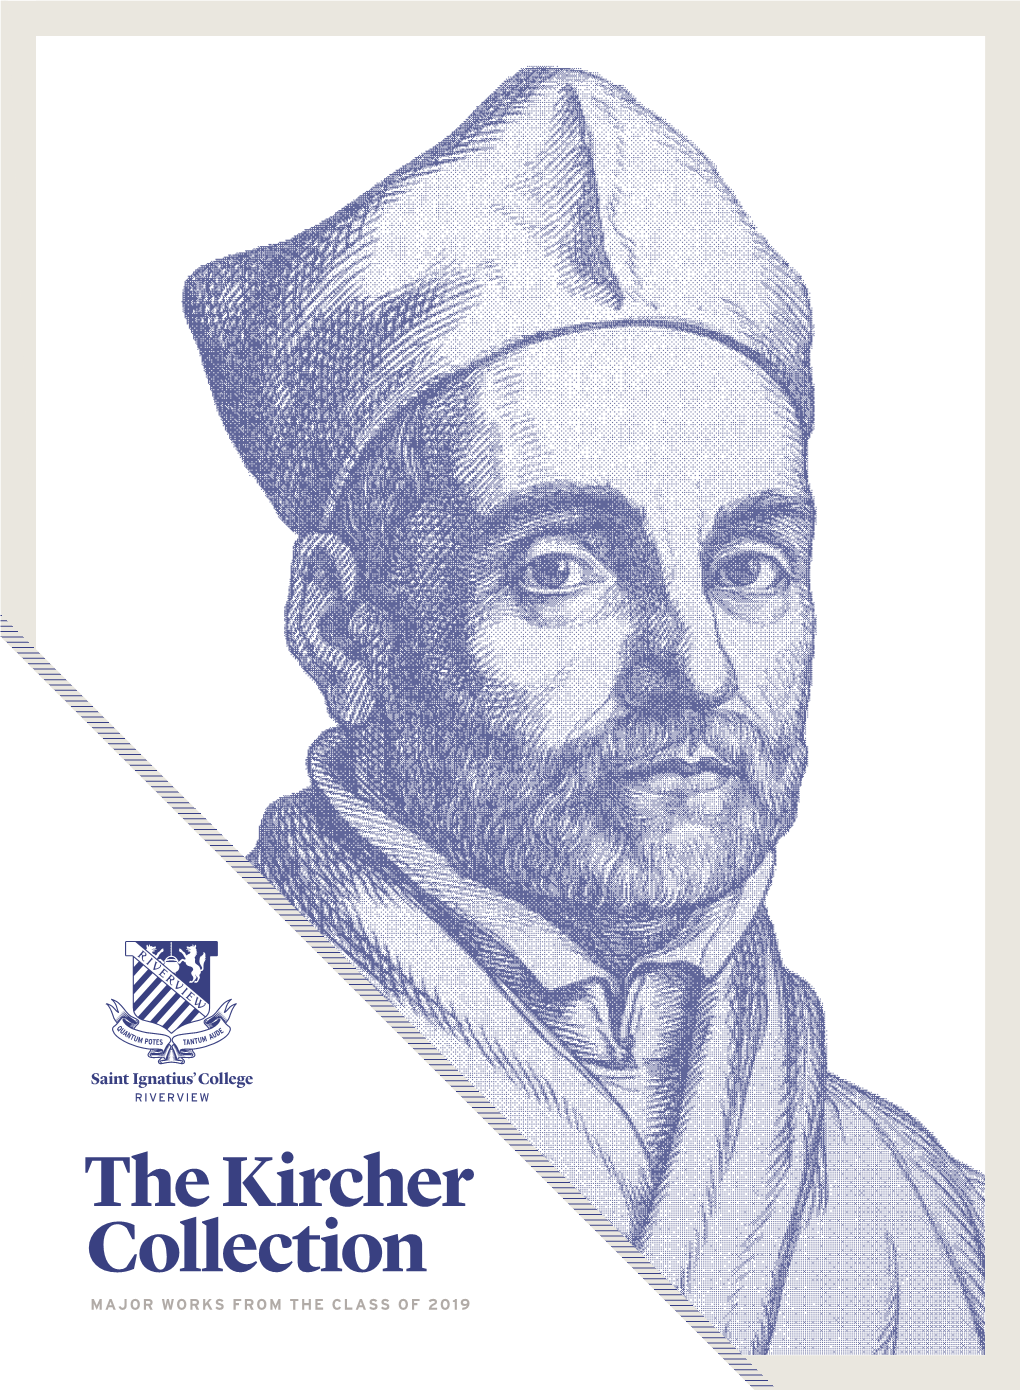 View the Kircher Collection 2019 Works